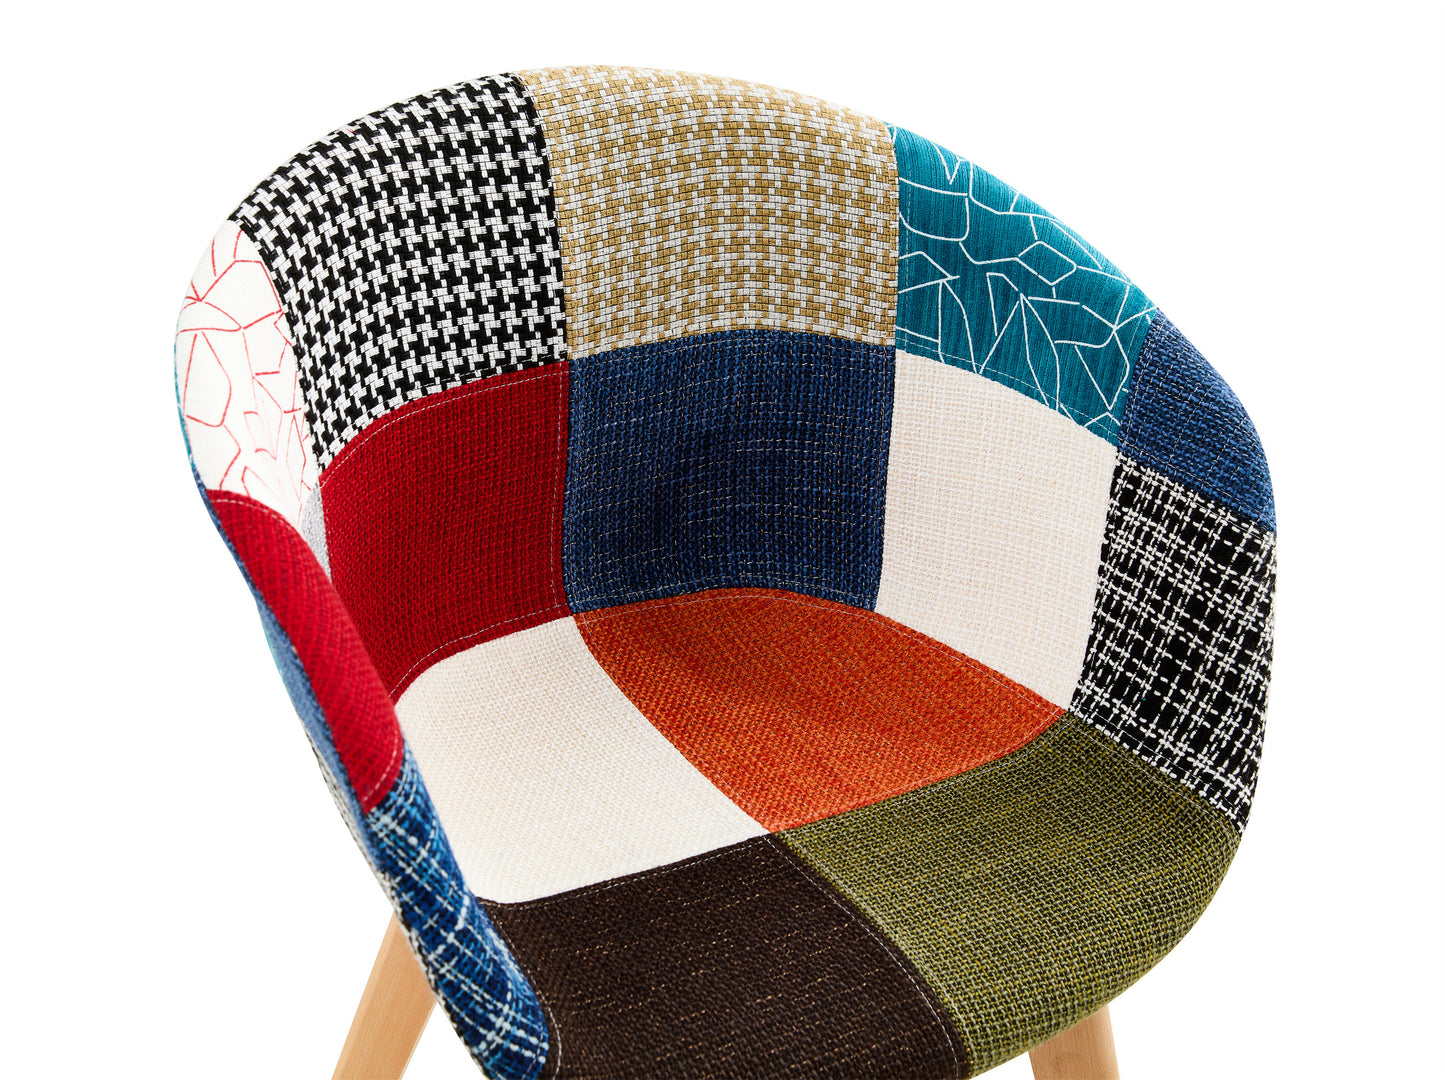 Patchwork Linen Accent Chairs, set of 2